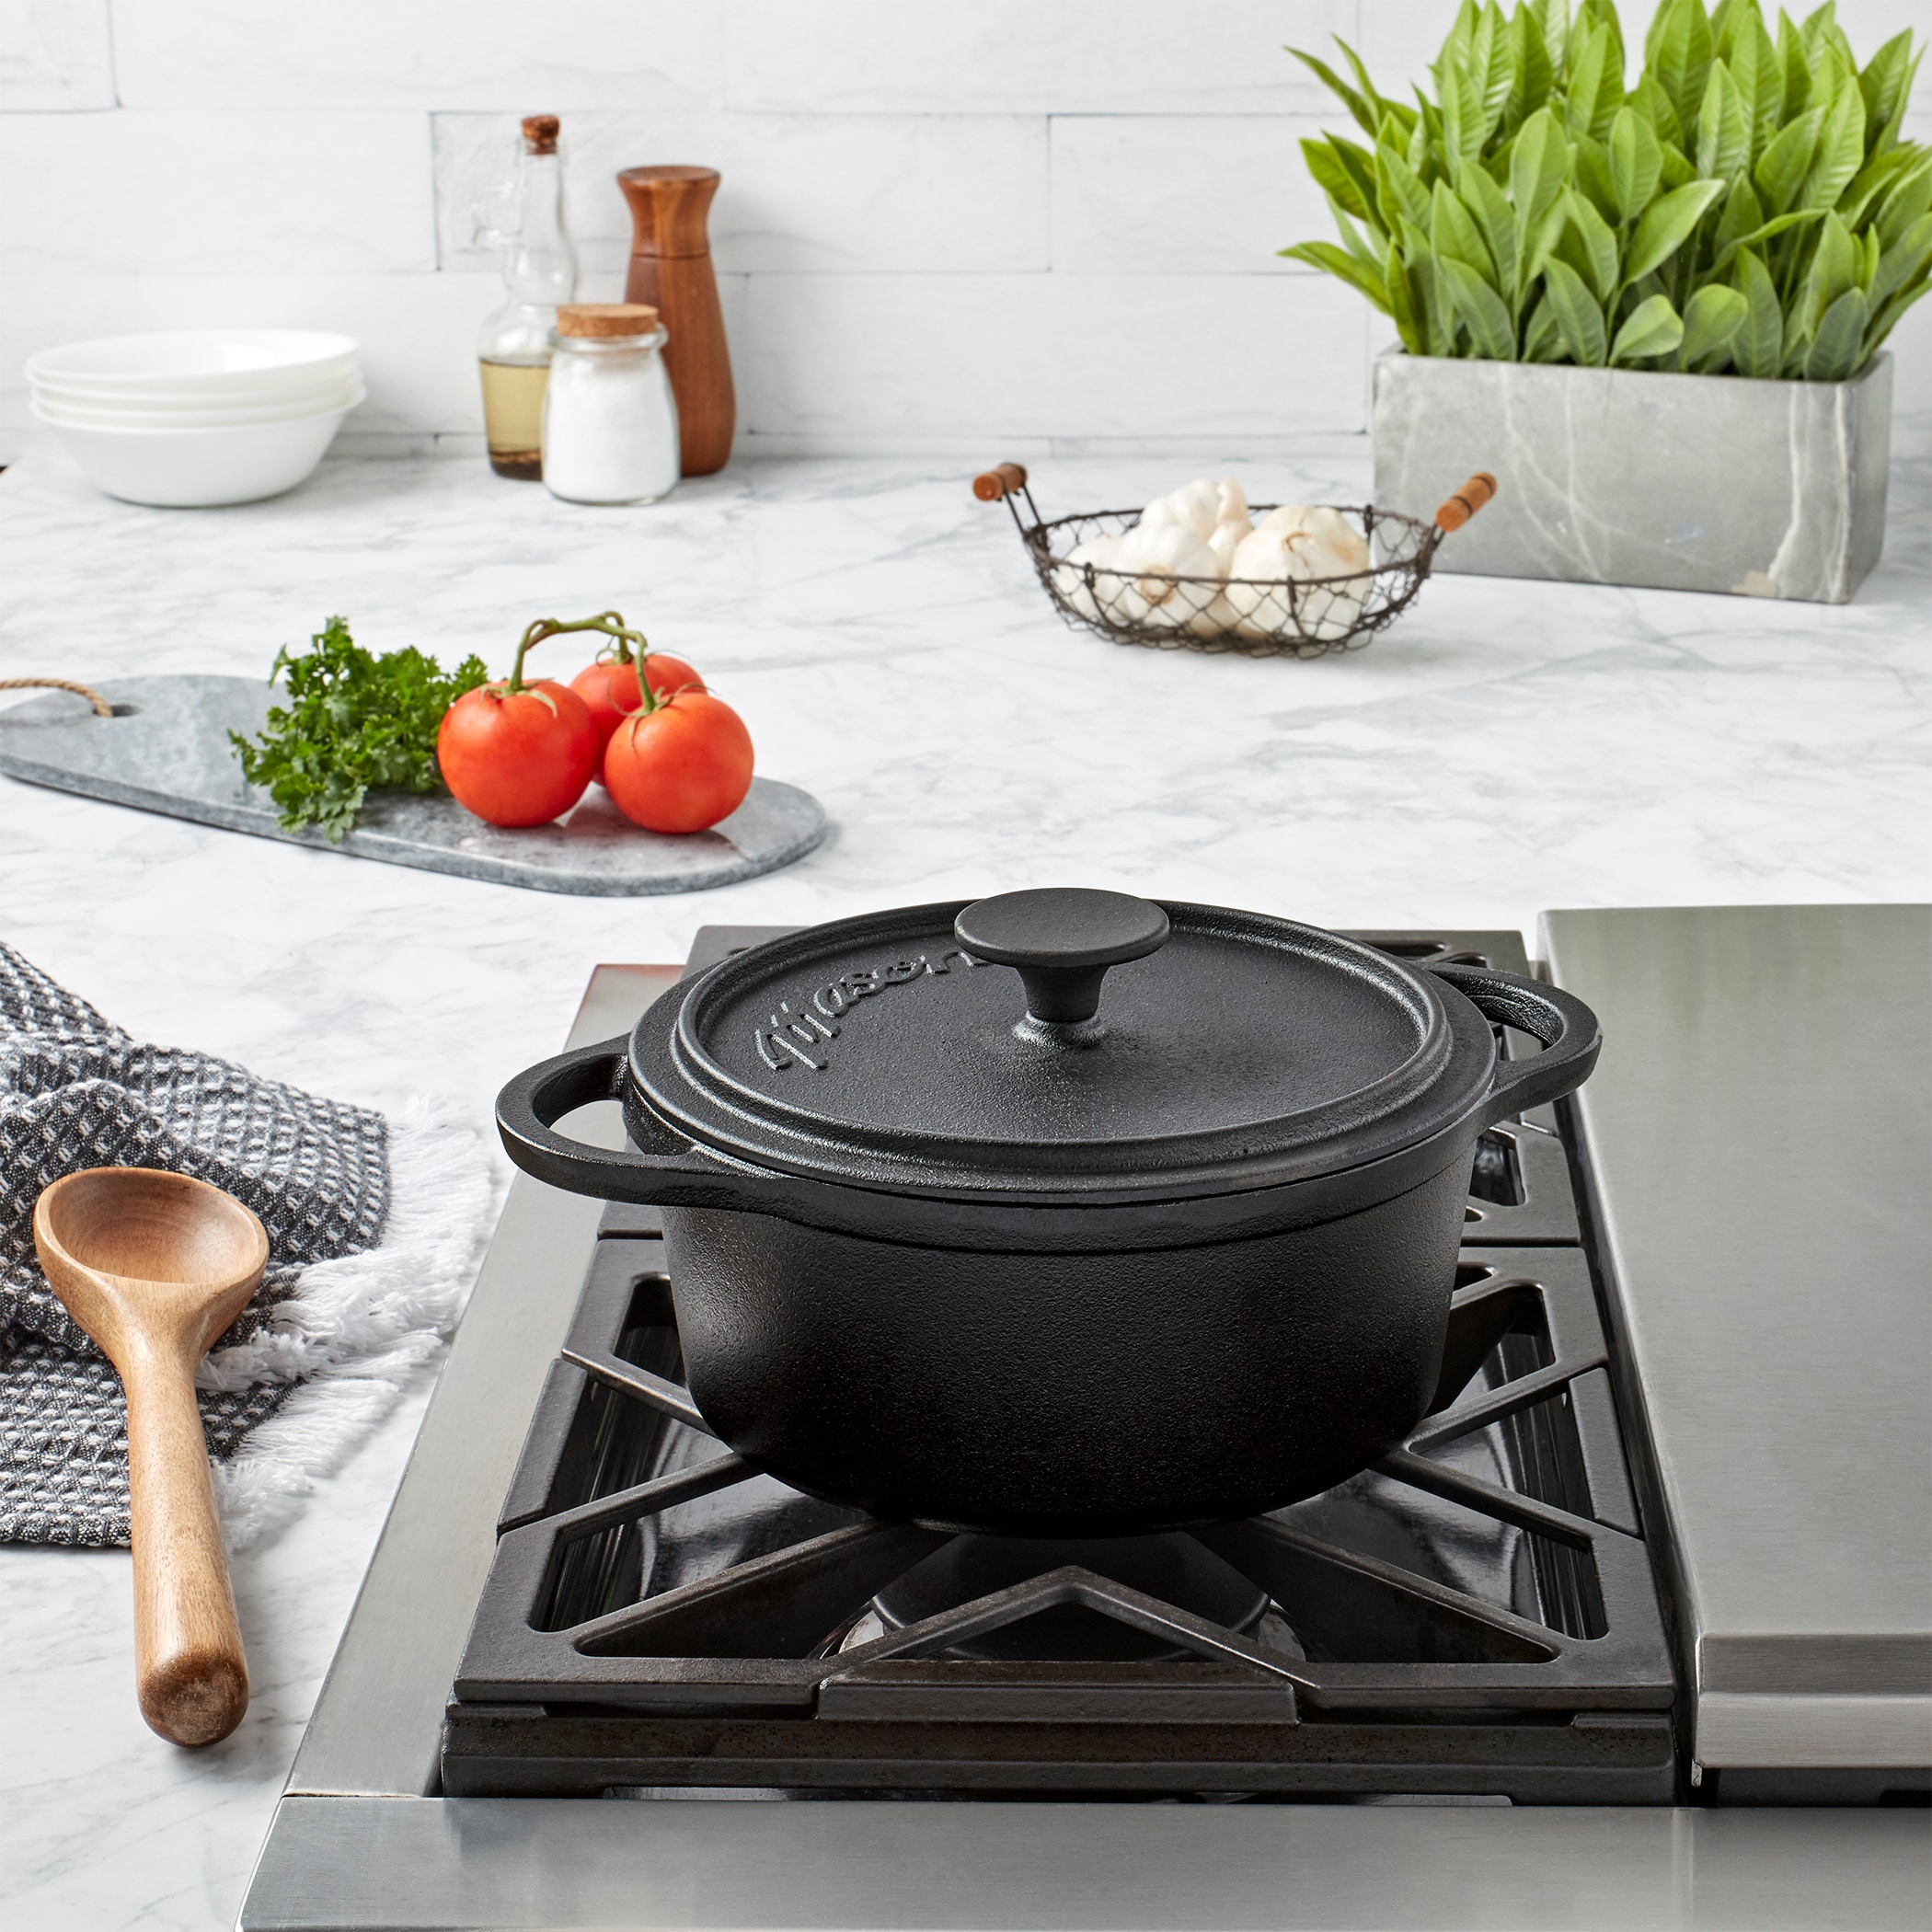 Mason Craft & More 3QT Covered Dutch Oven Cast Iron, Black, Oven Safe, Induction Compatible